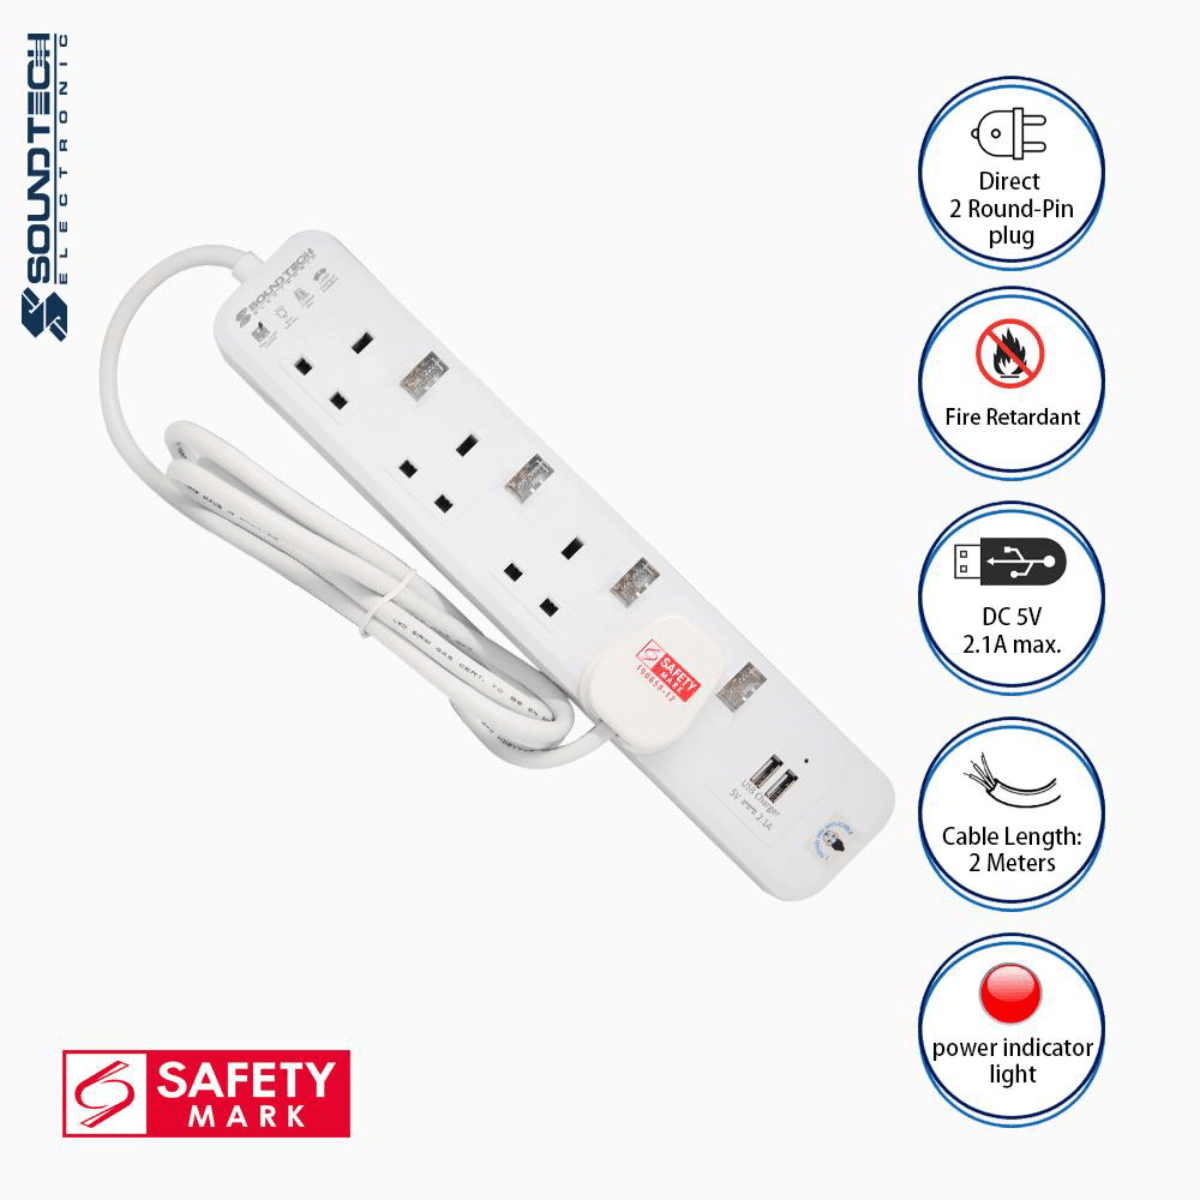 Soundteoh 4 Way Extension Socket With USB PS-142U